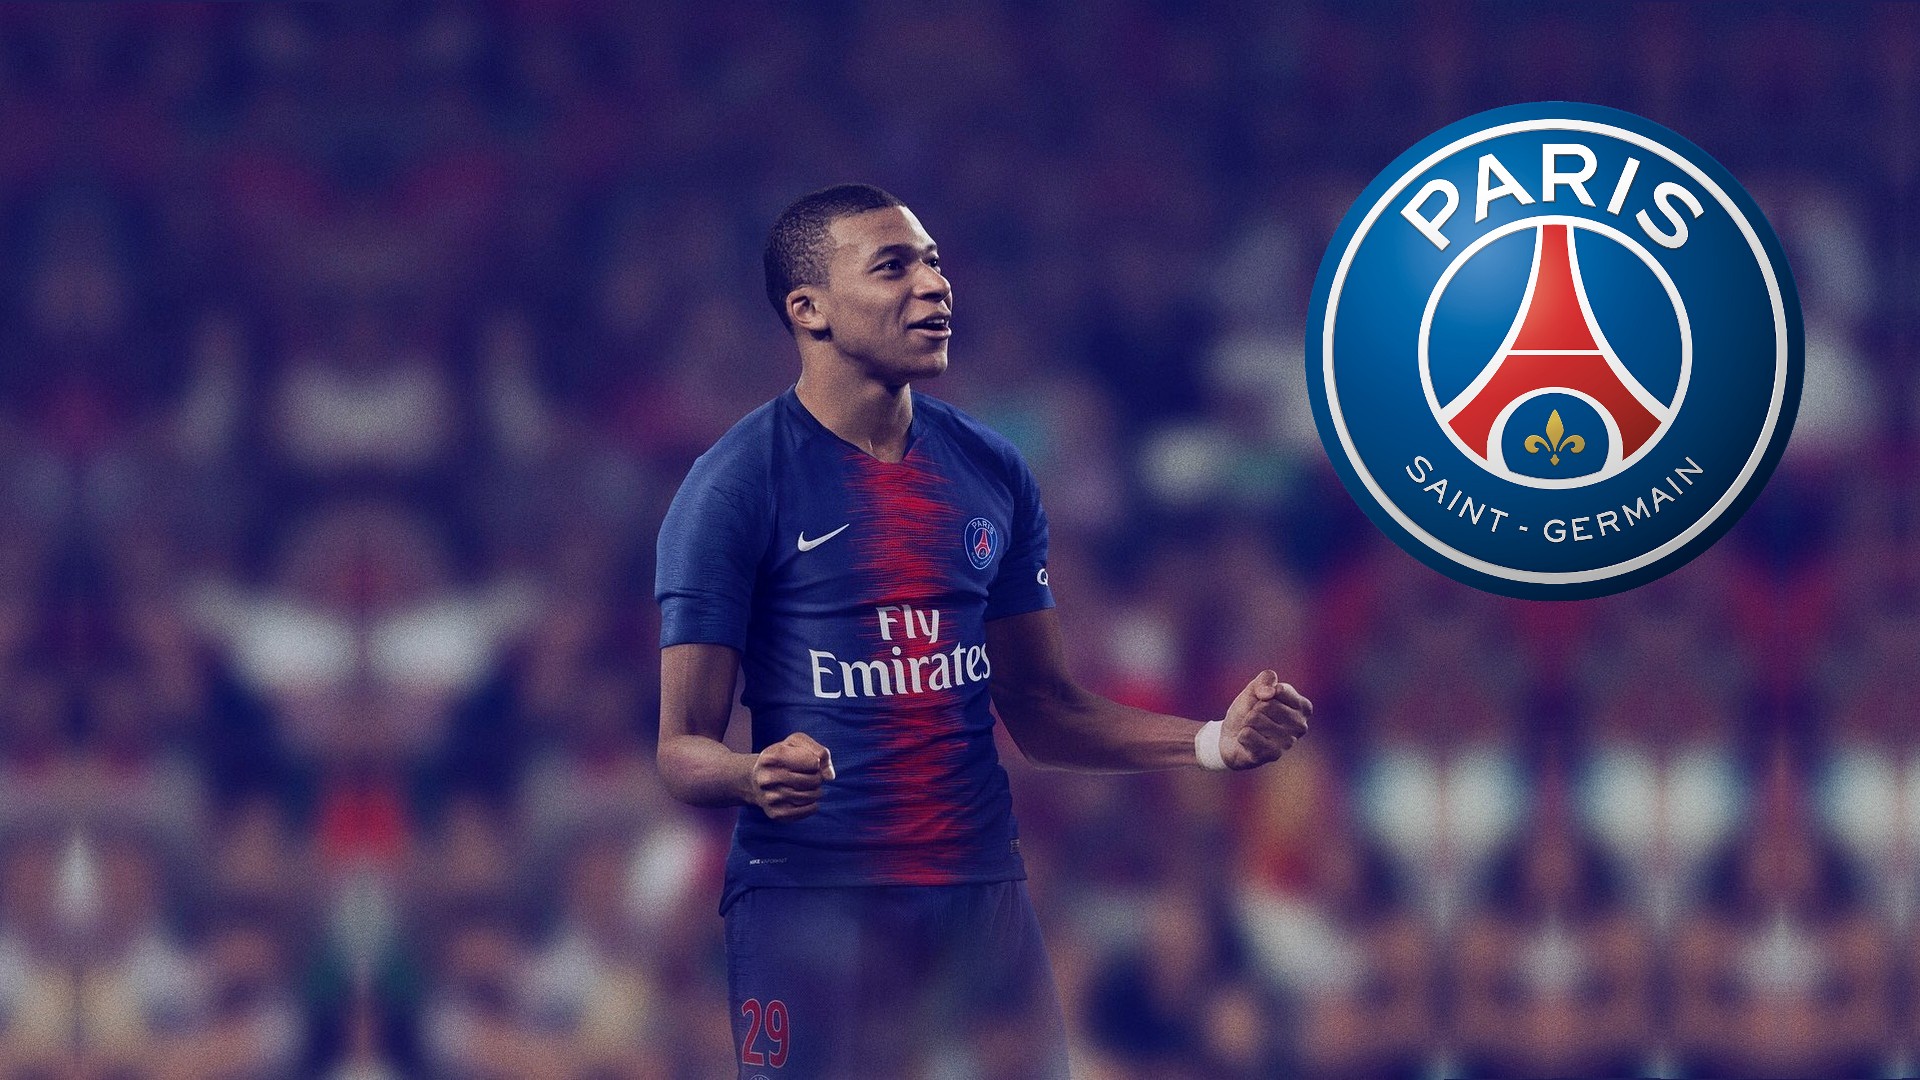 Mbappe Paris Saint-Germain Wallpaper HD With Resolution 1920X1080 pixel. You can make this wallpaper for your Mac or Windows Desktop Background, iPhone, Android or Tablet and another Smartphone device for free